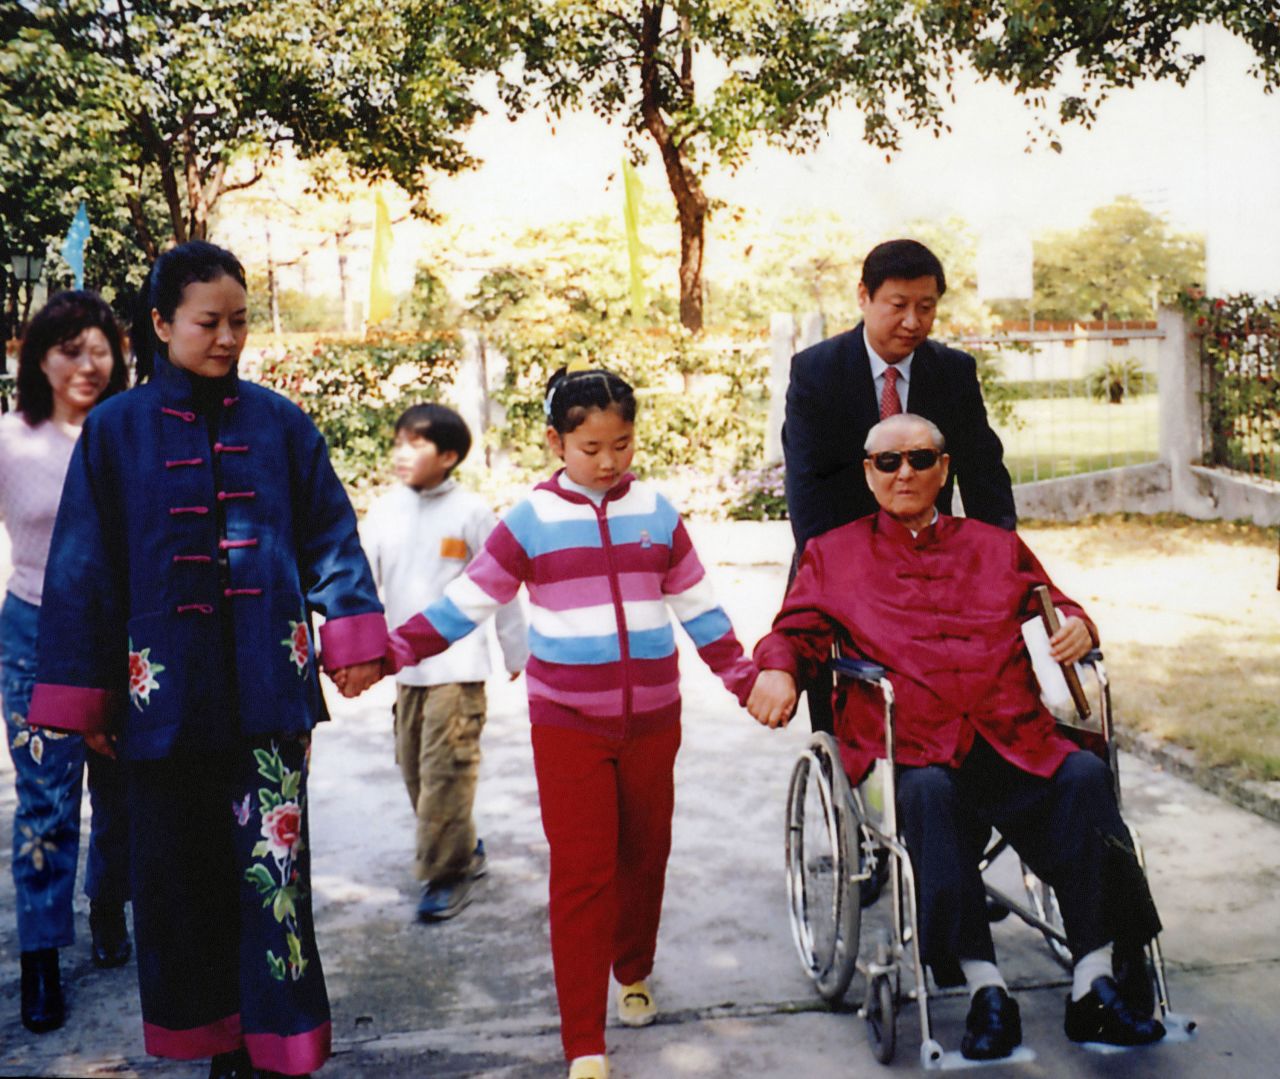 Xi pushes his father as he walks with his wife and his daughter, Xi Mingze, in 2012.